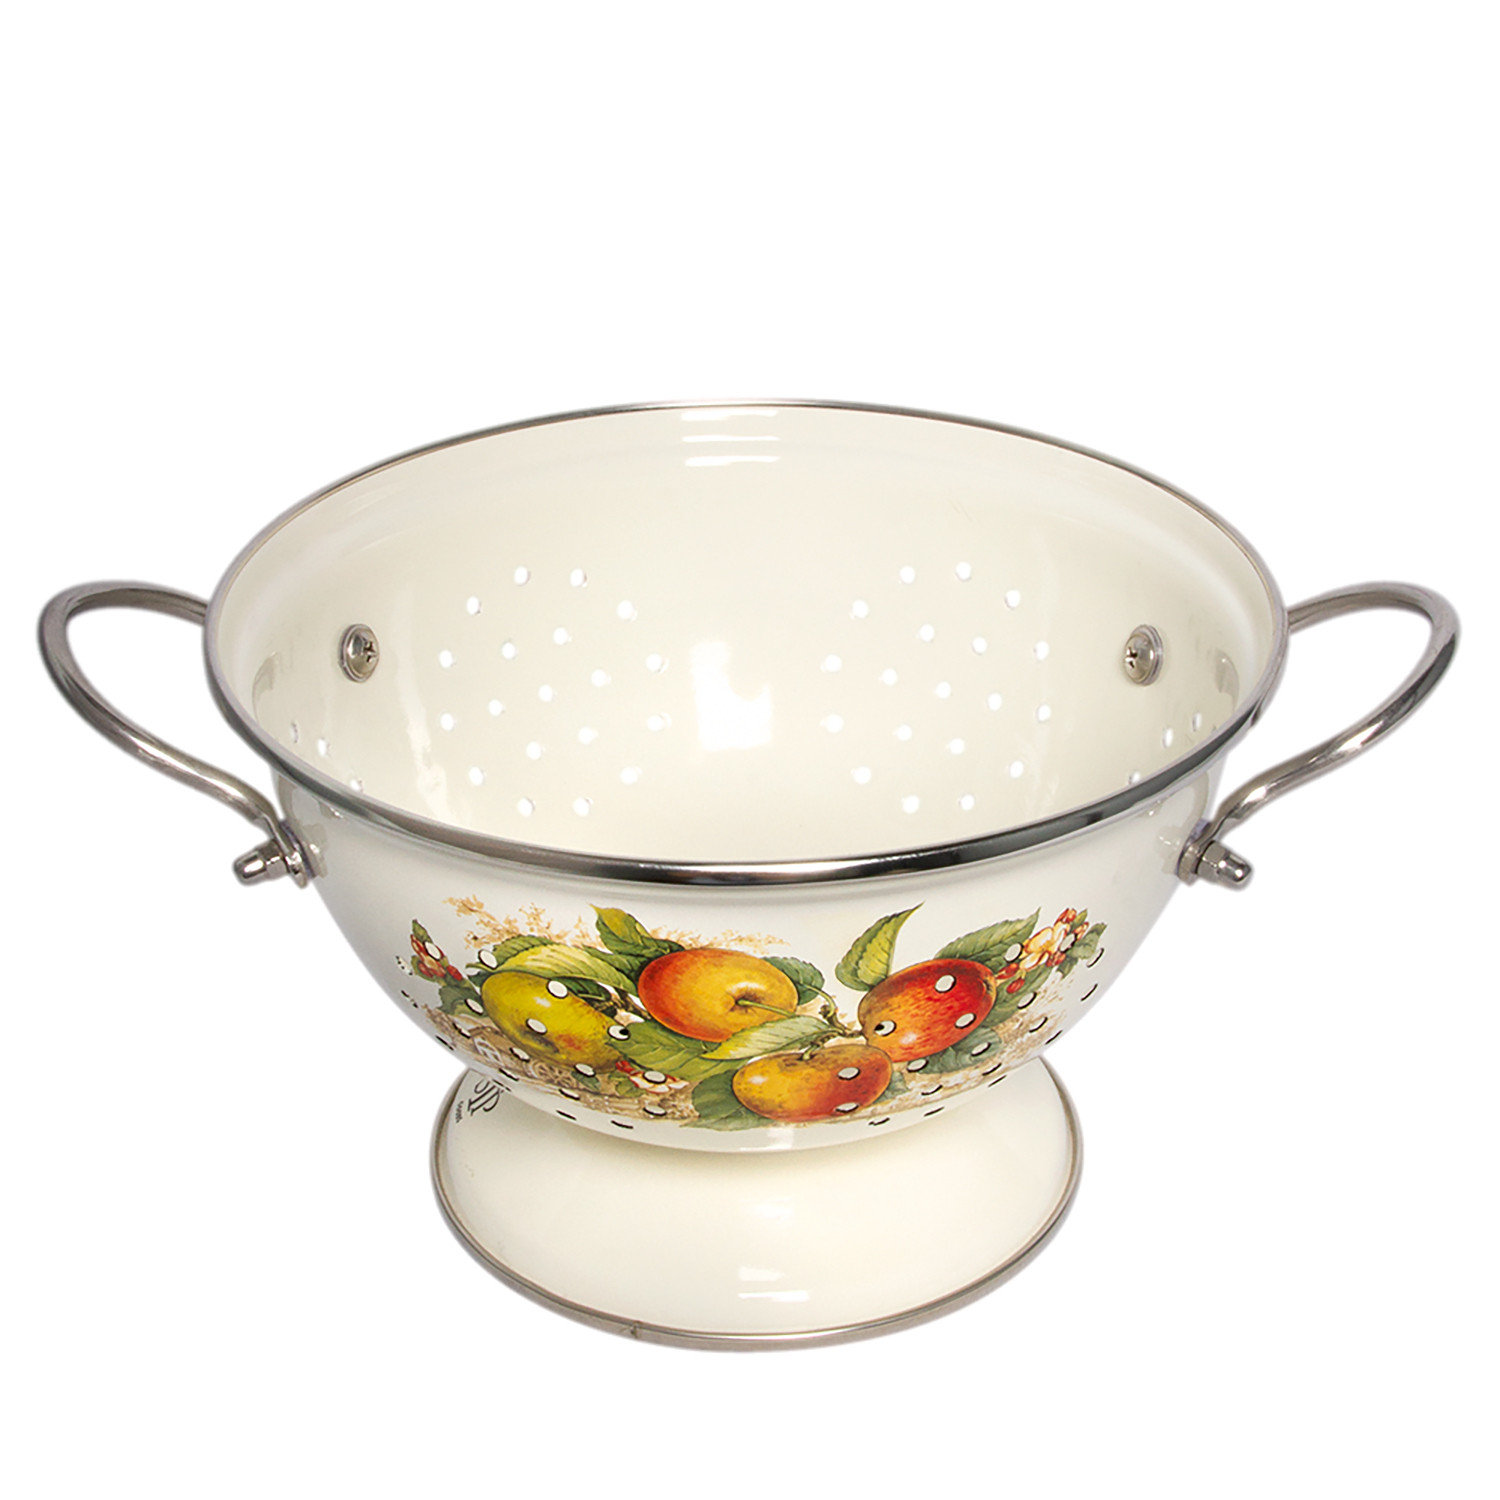 Ovente 4.8 Quart Stovetop Stainless Steel Pasta Pot with Strainer